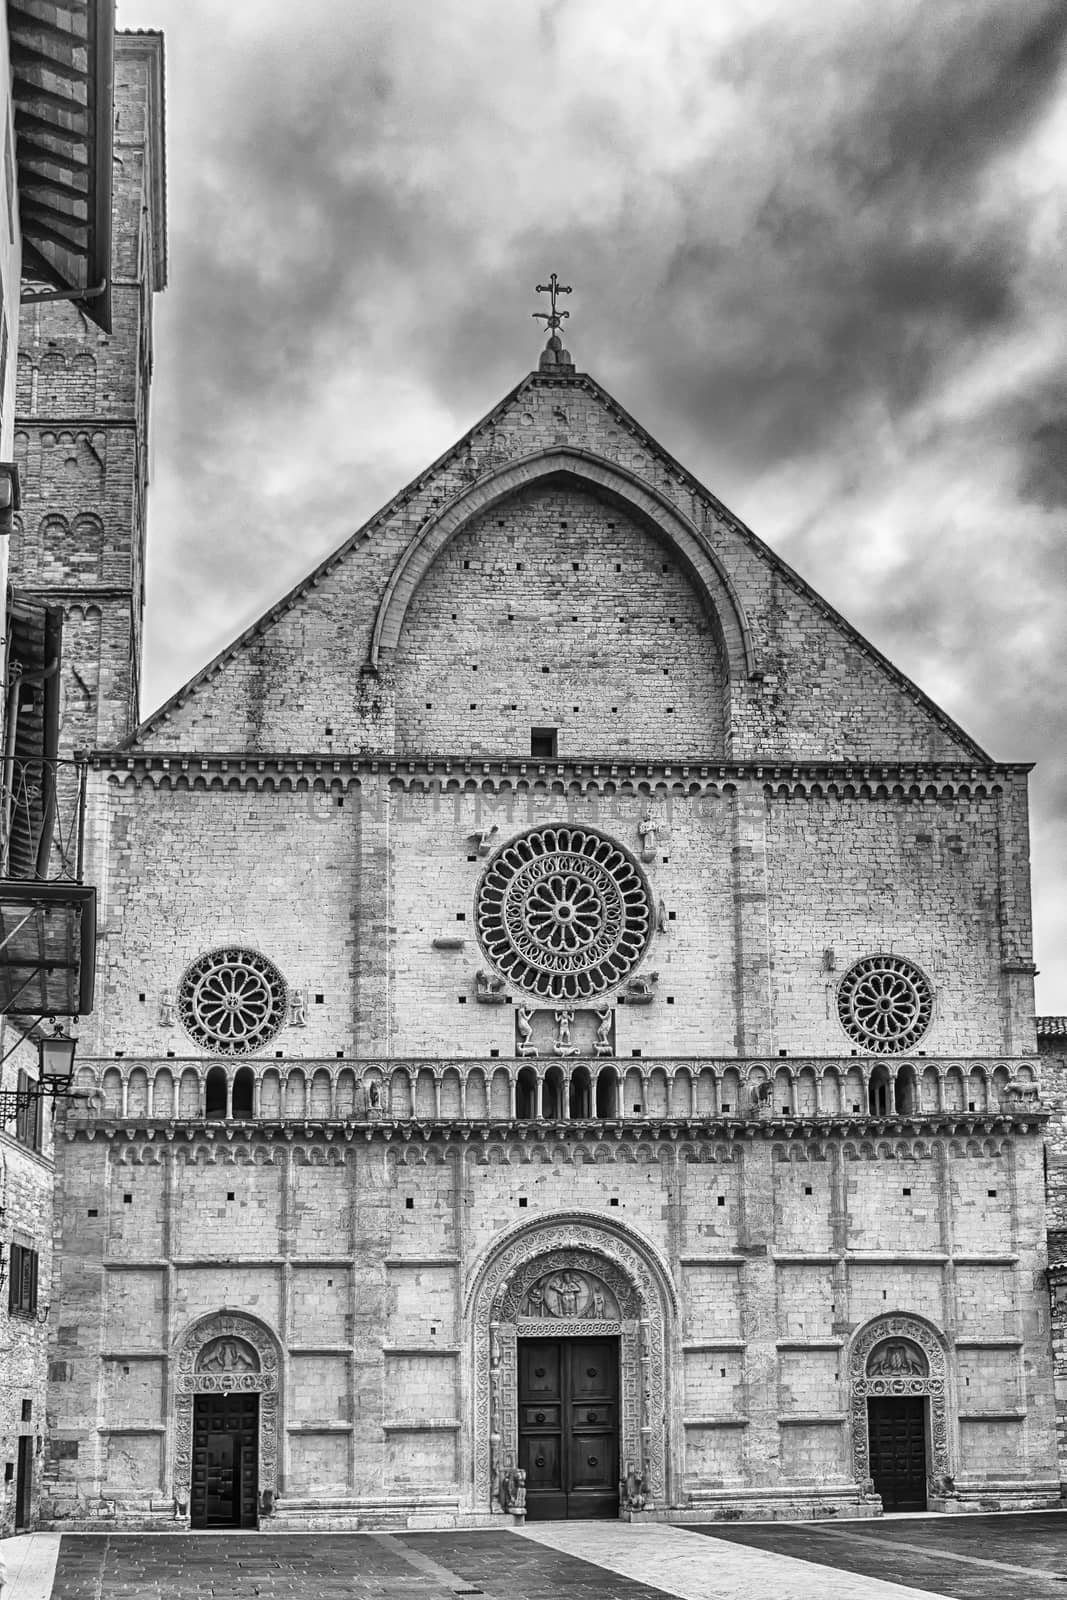 Exterior view of the medieval Cathedral of Assisi, Italy by marcorubino